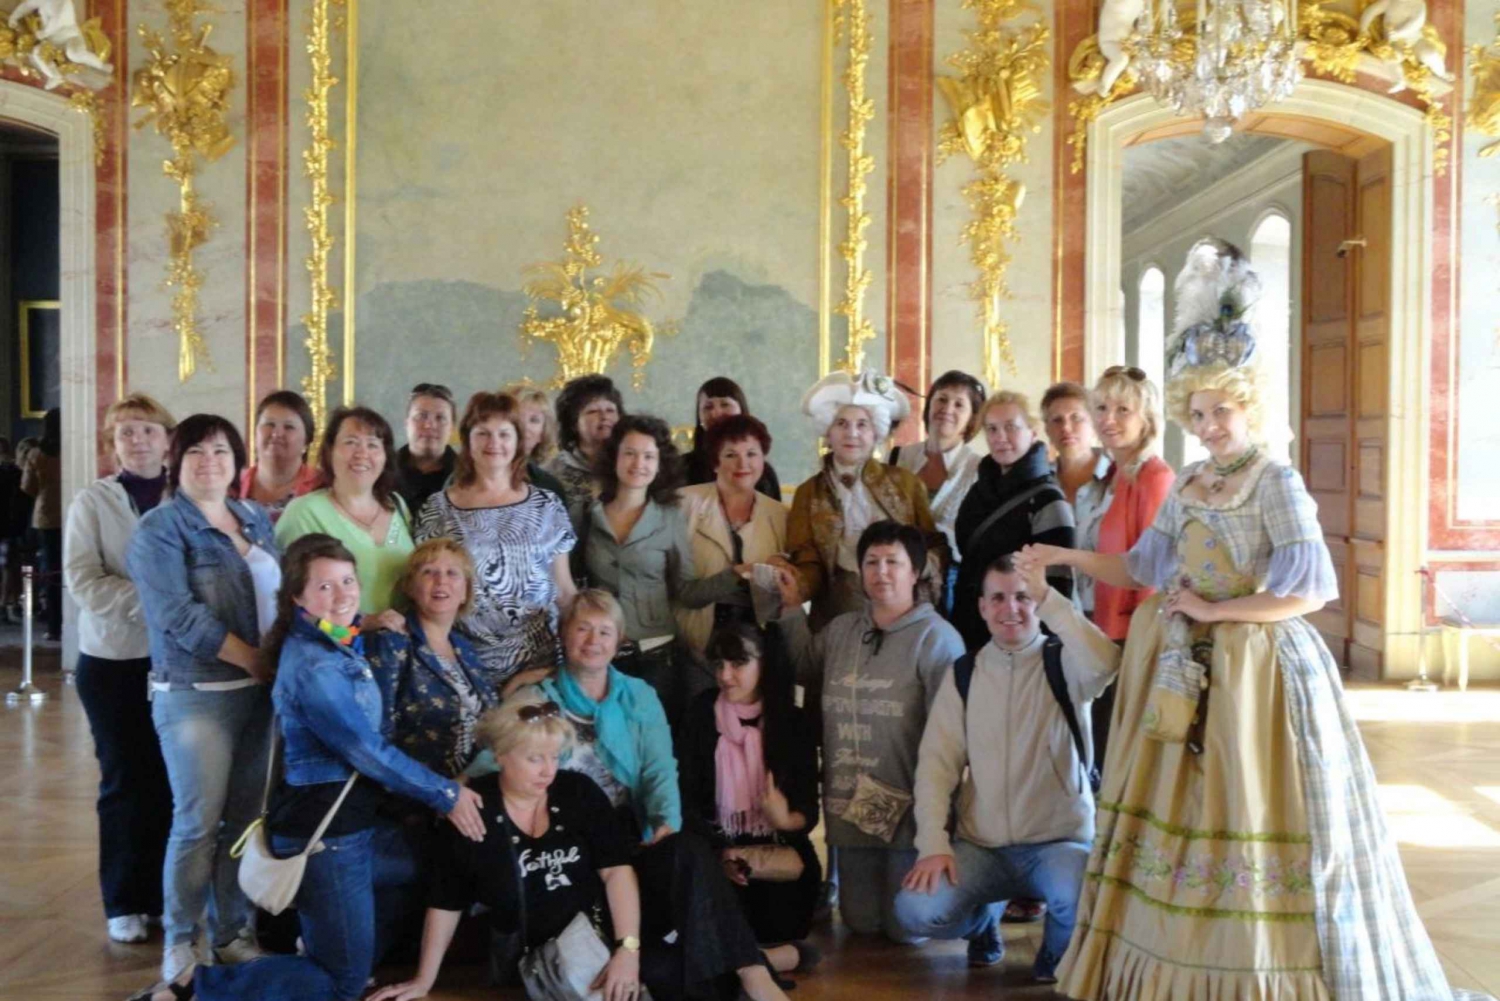 Half-Day Rundale Palace Tour from Riga